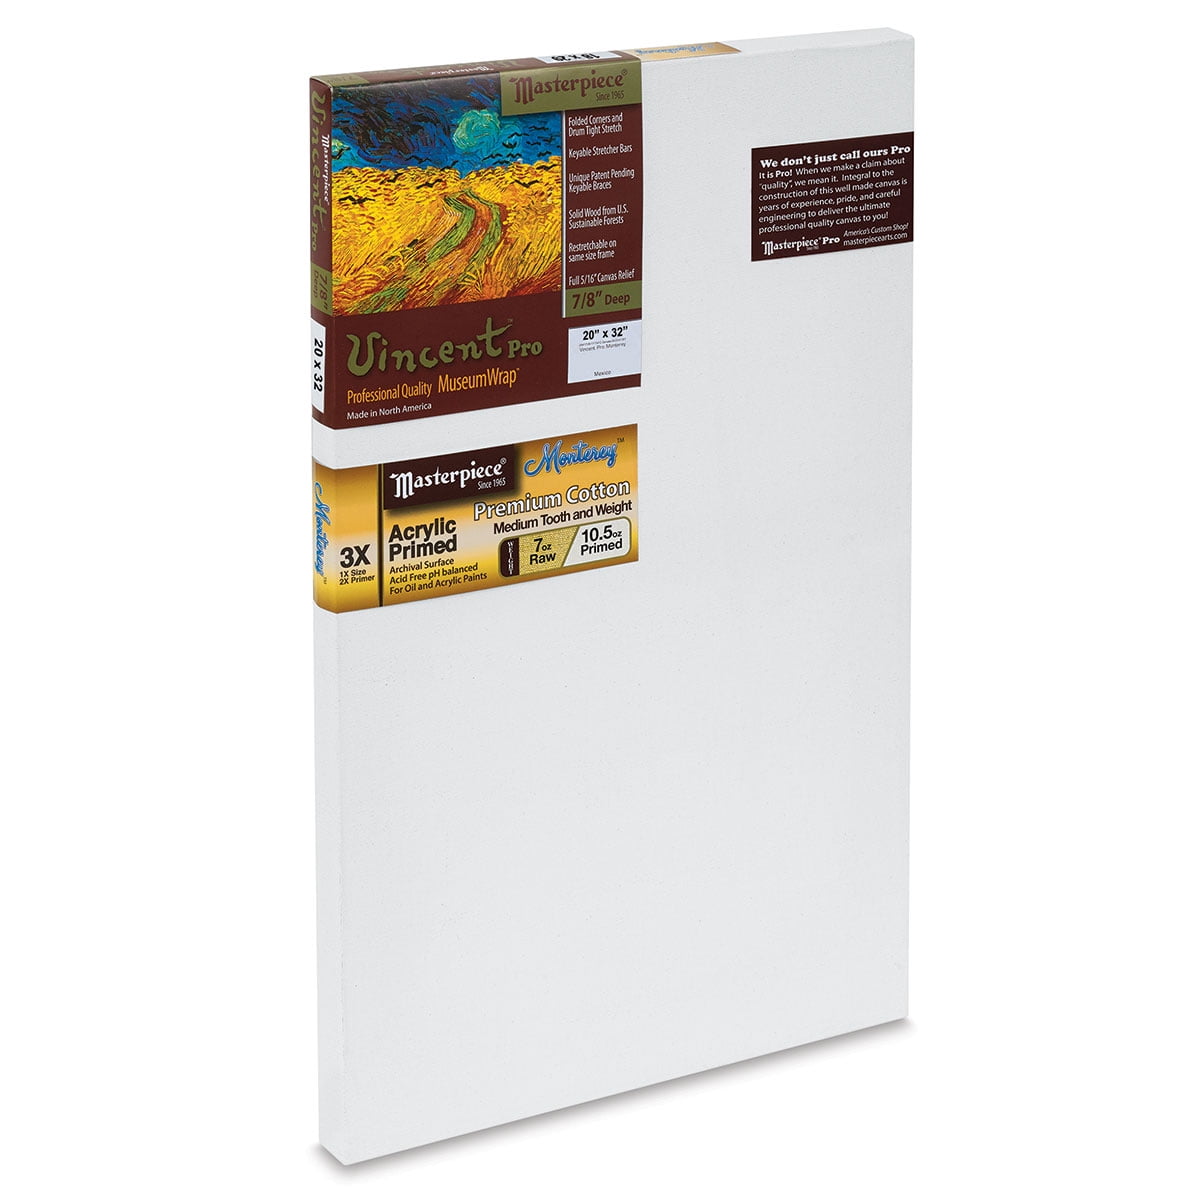 Mini Pyramid of Rectangular Stretched Artist Canvas 8 Pack — TCP